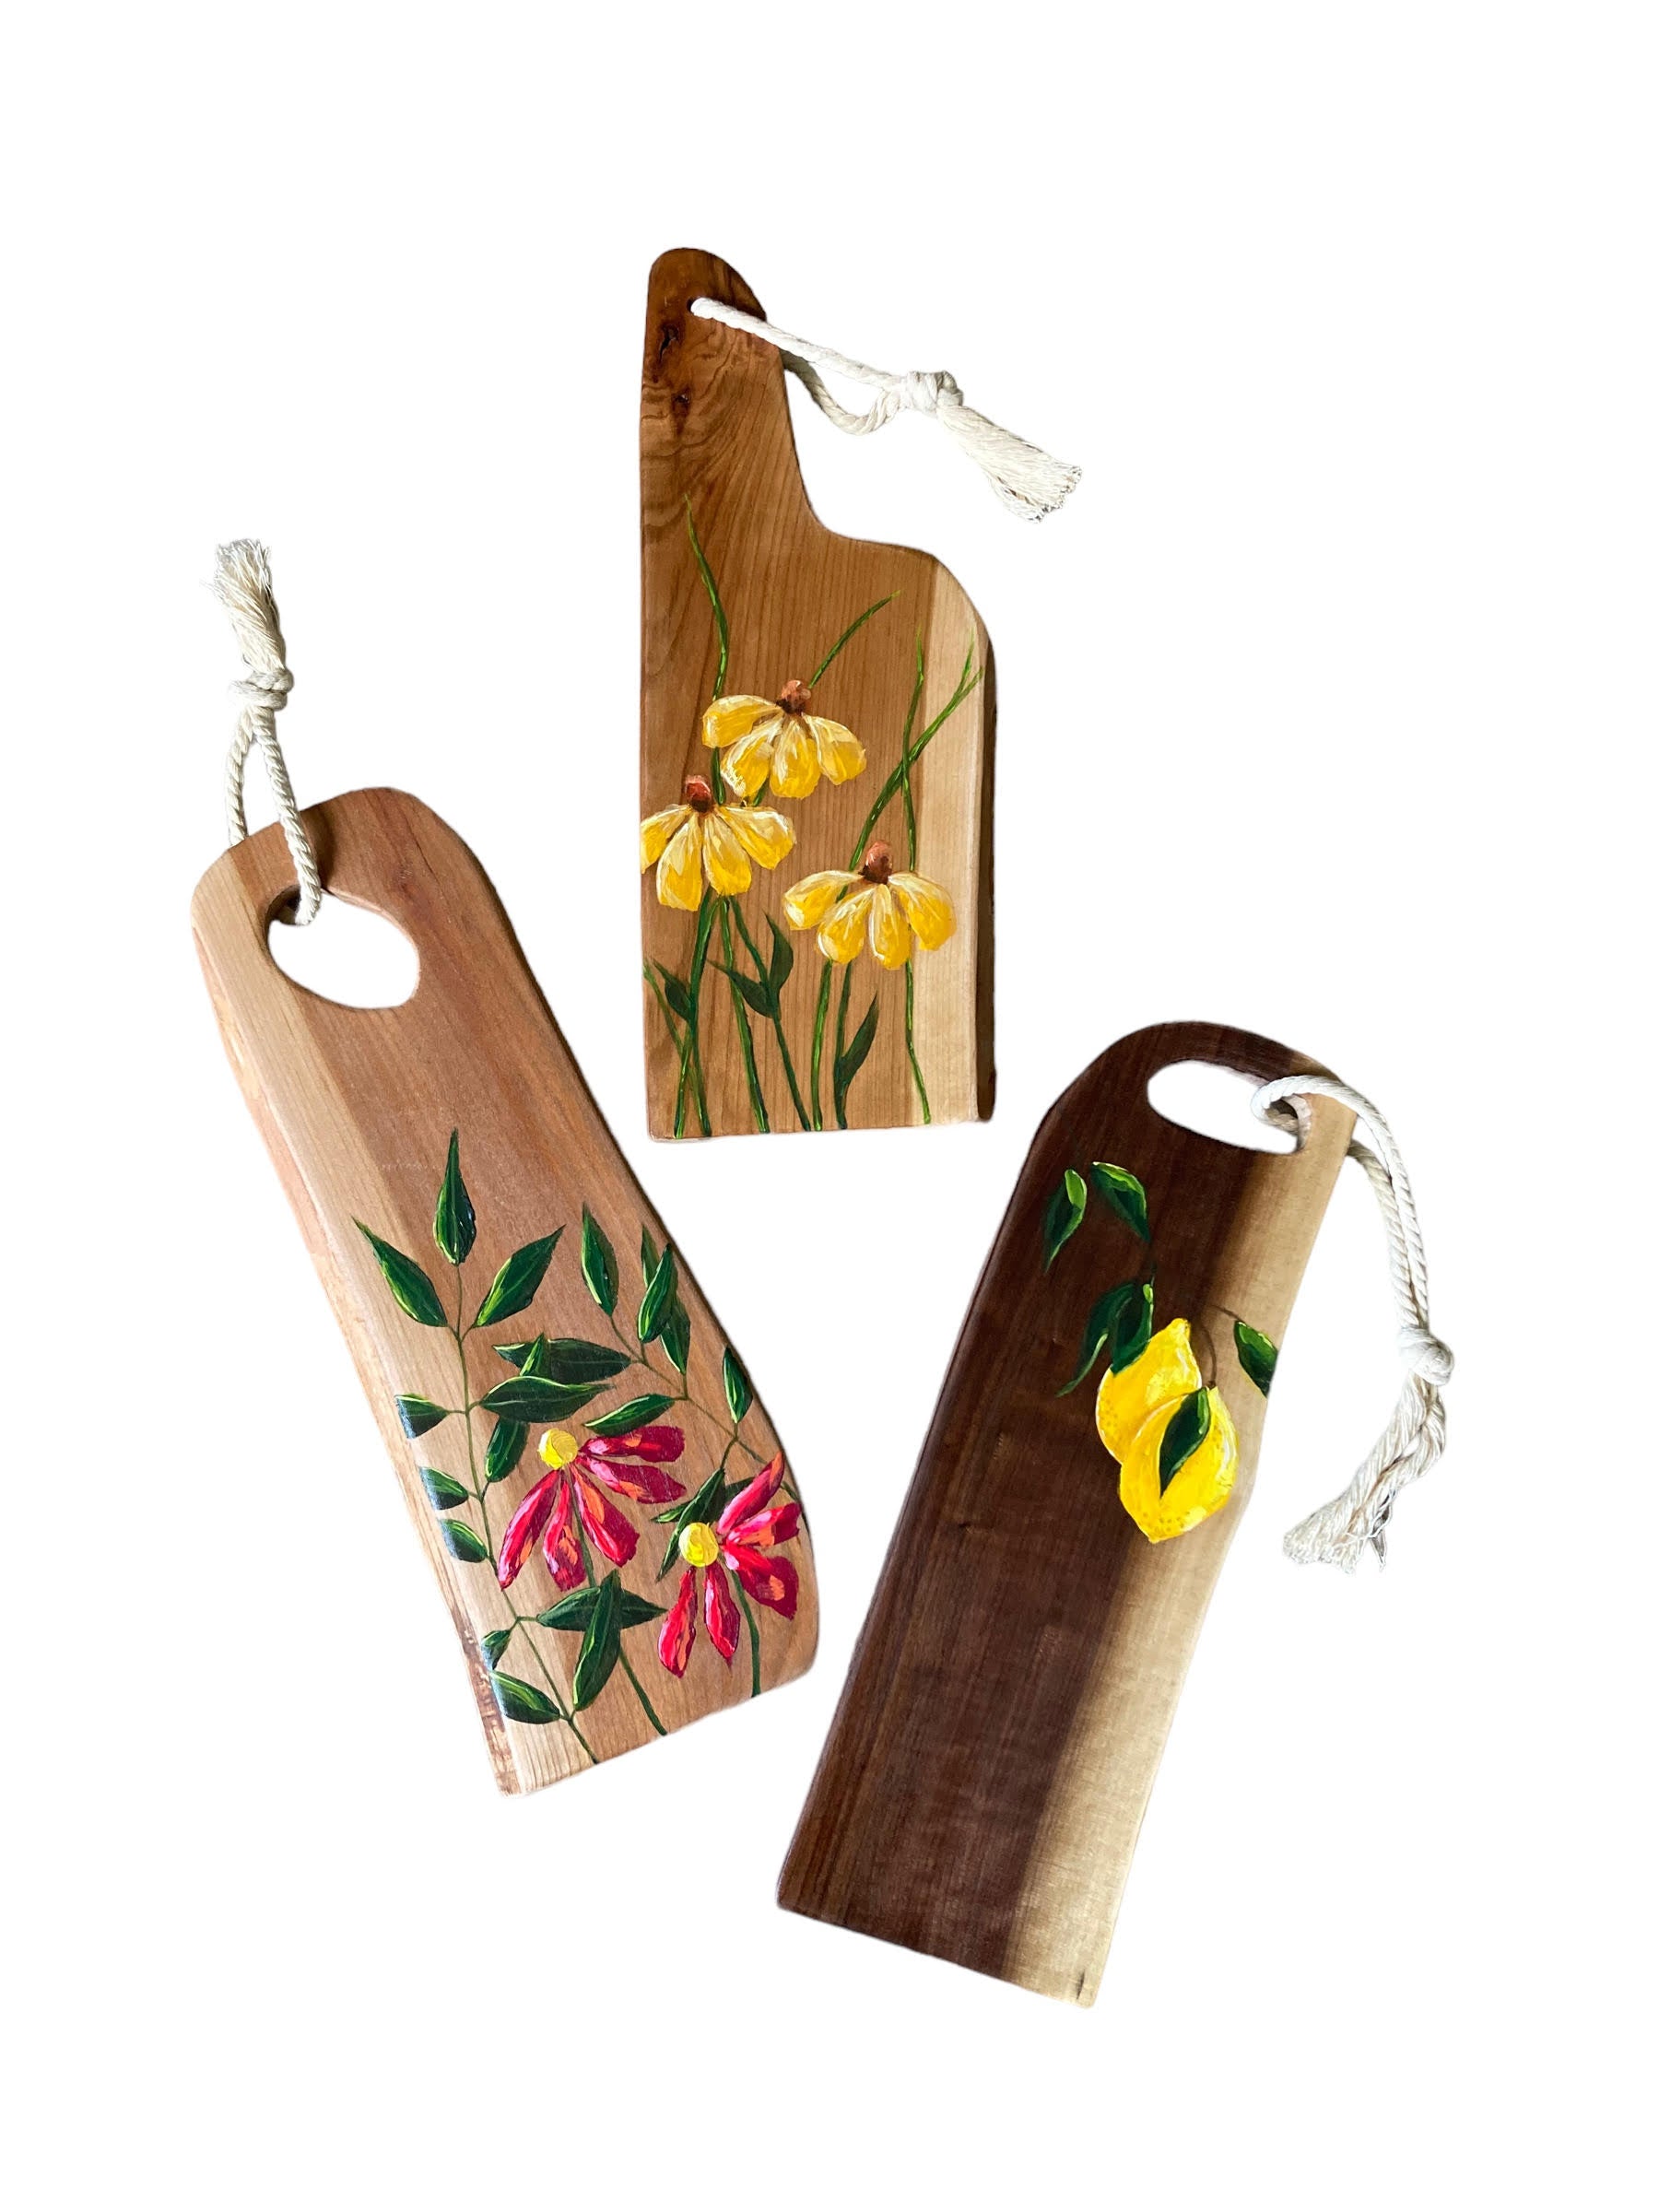 Charcuterie/Serving boards